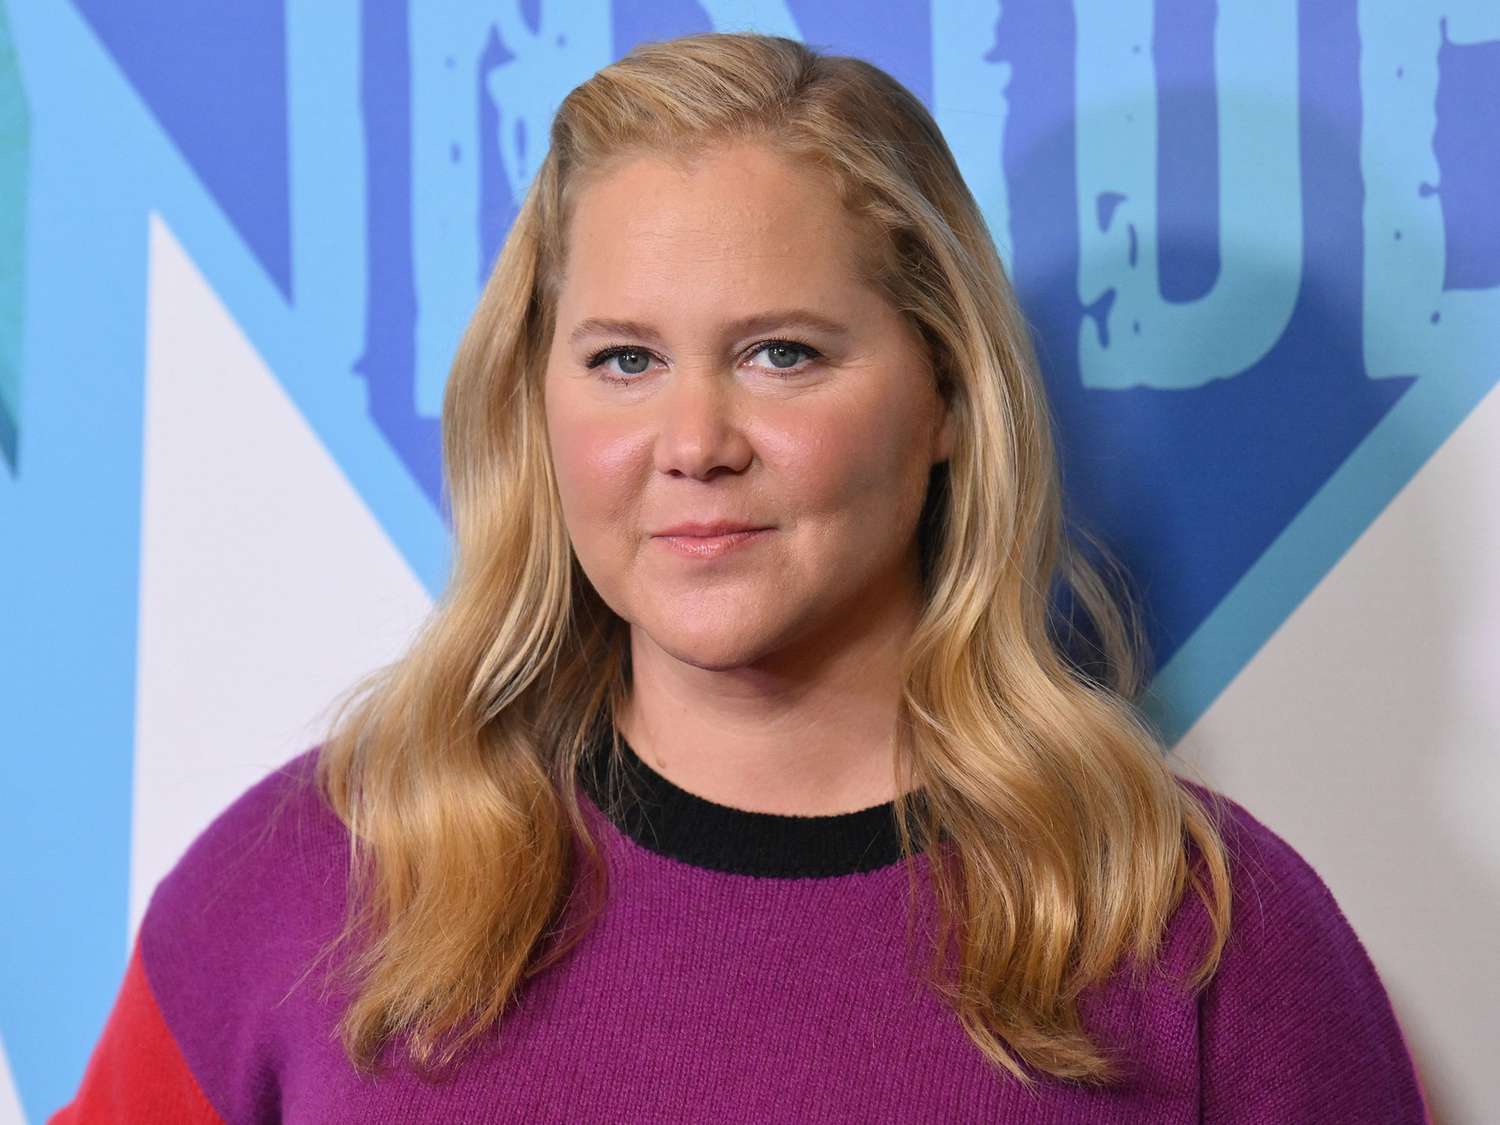 Amy Schumer Says She's 'Breadwinner' at Home but 'Still the Mom': 'Don't Have Dads Organize a Birthday Party’